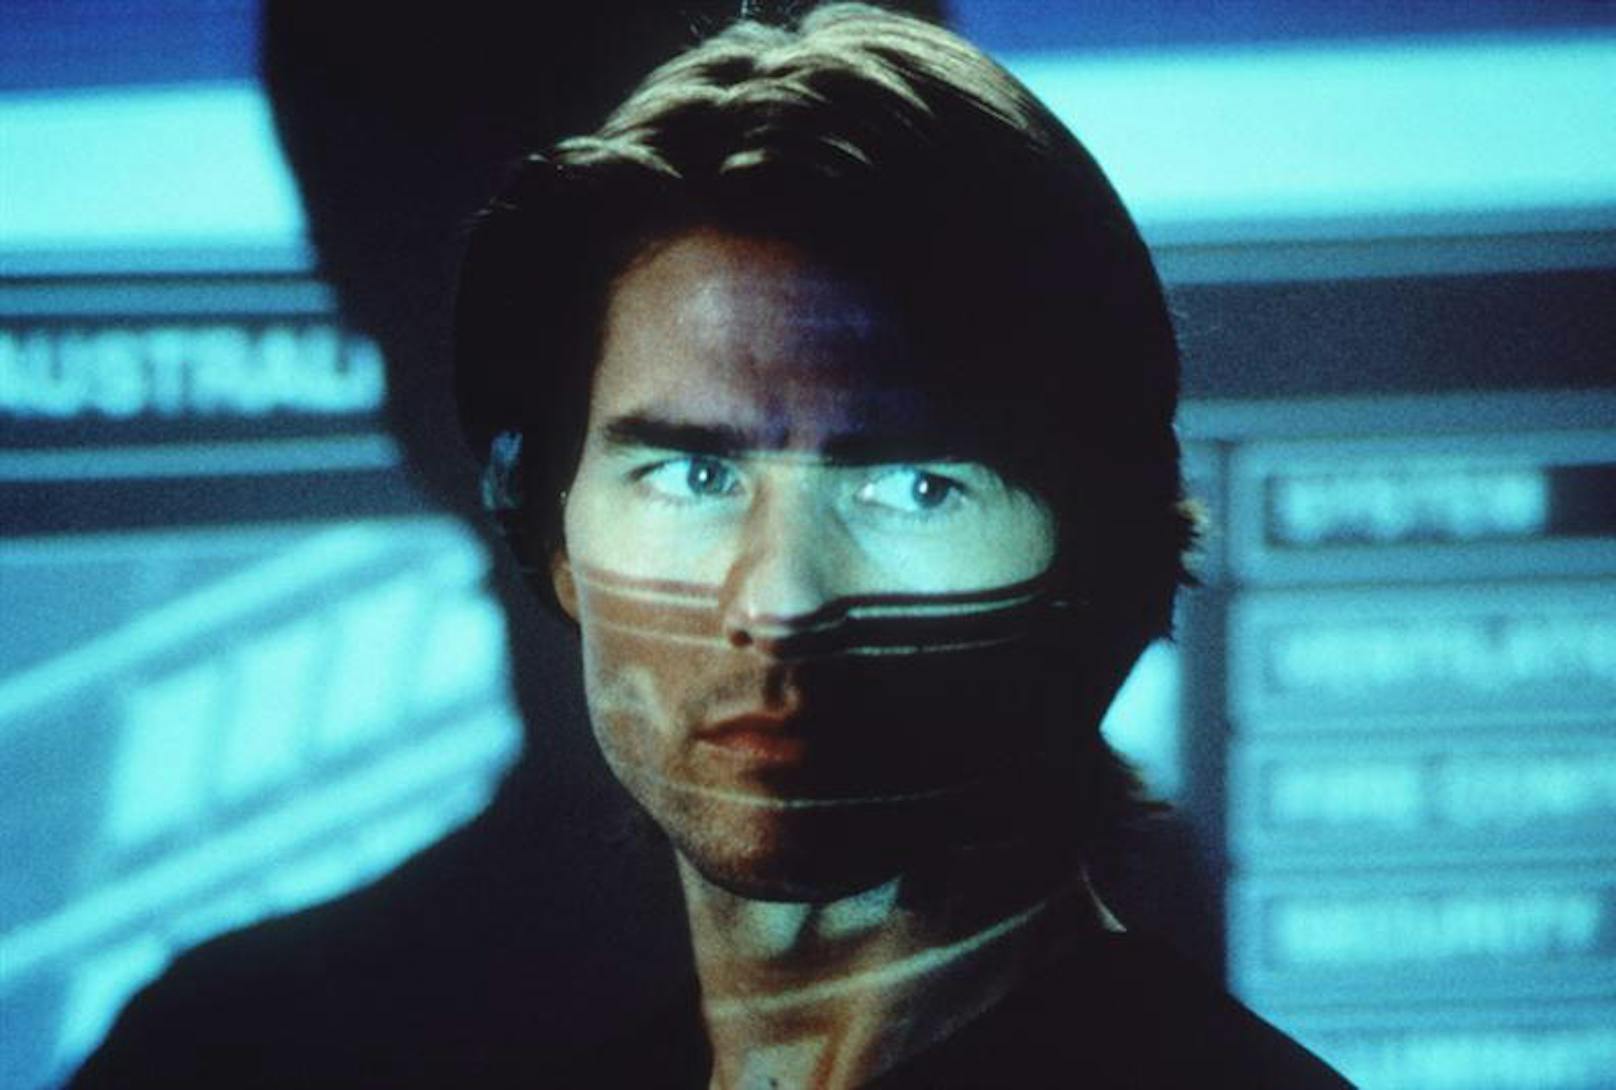 Tom Cruise in "Mission: Impossible 2"